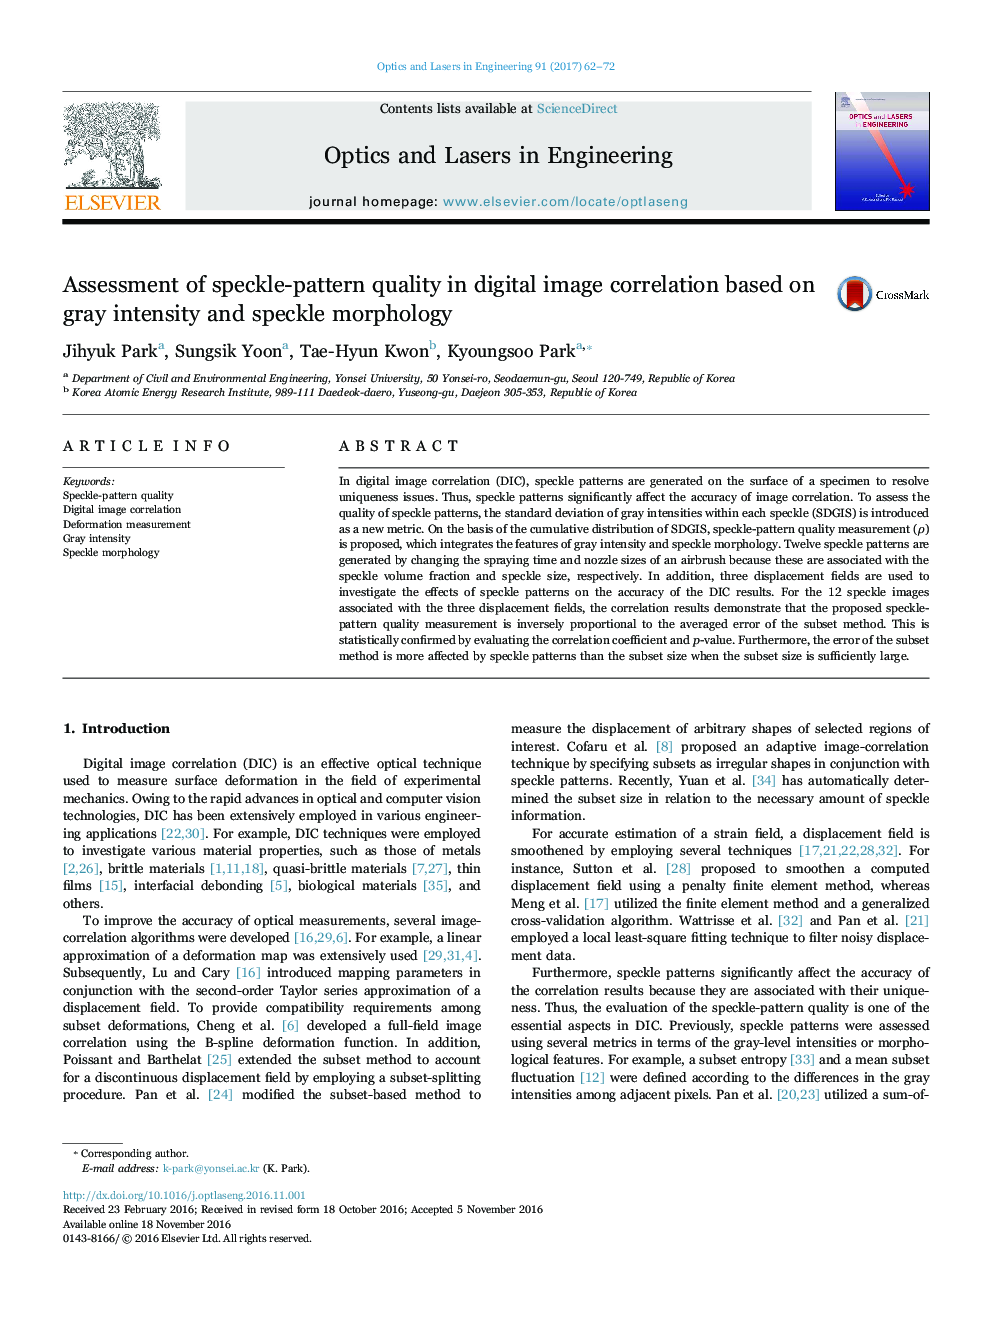 Assessment of speckle-pattern quality in digital image correlation based on gray intensity and speckle morphology